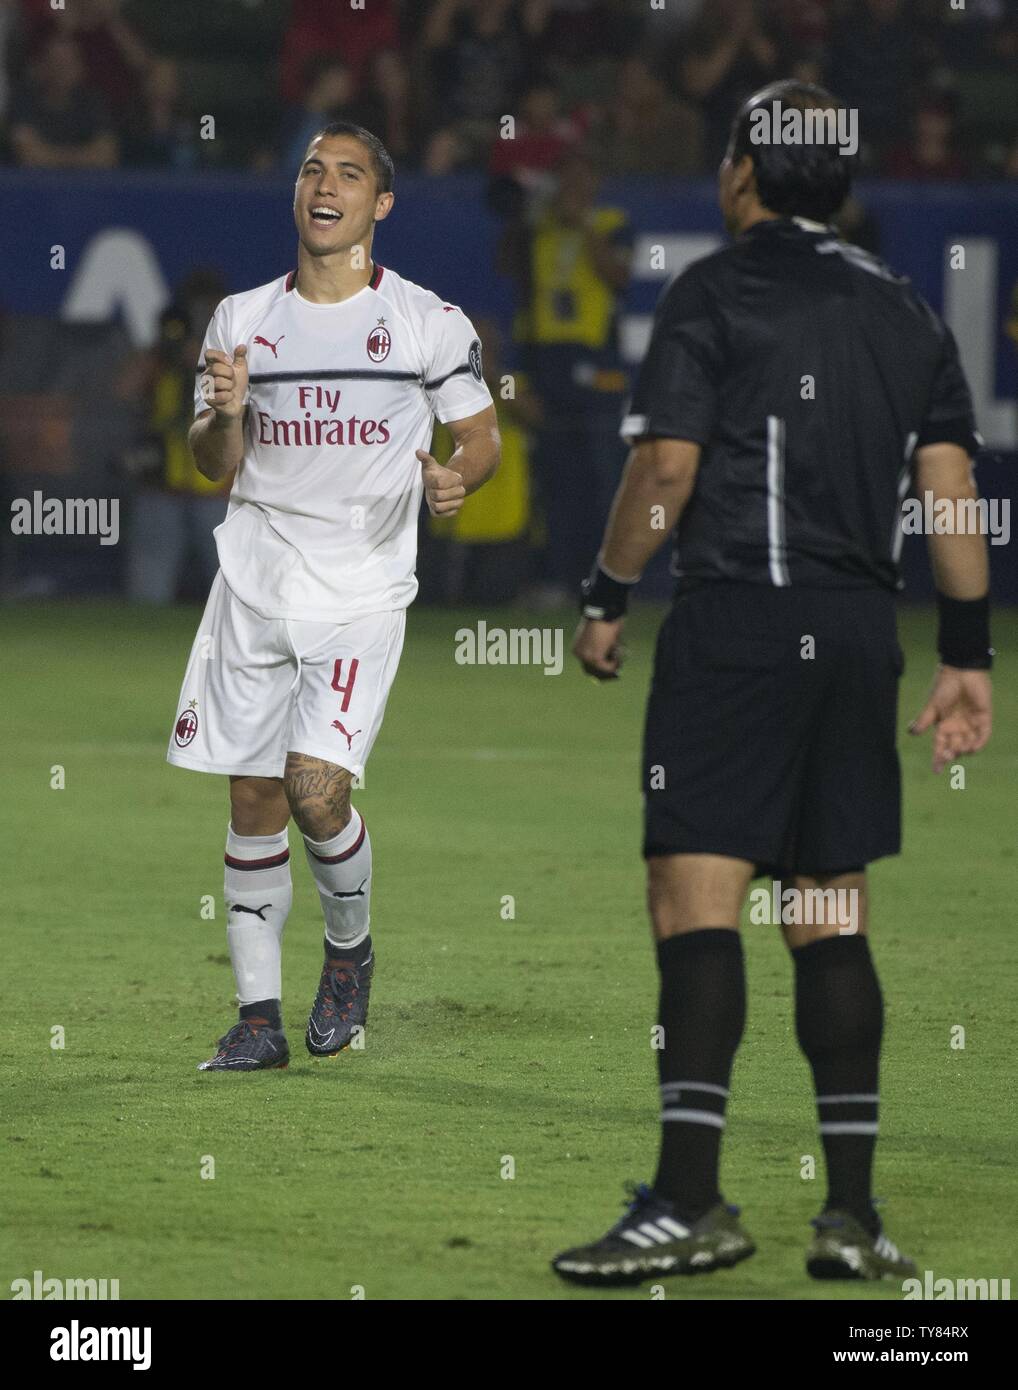 Milan midfielder Jose Mauri (4) celebrates his successful penalty kick during the International Champions Cup match between AC Milan vs. Manchester United on Wednesday, July 25 2018 at StubHub Center, Carson, California.  Photo by Michael Goulding/UPI Stock Photo